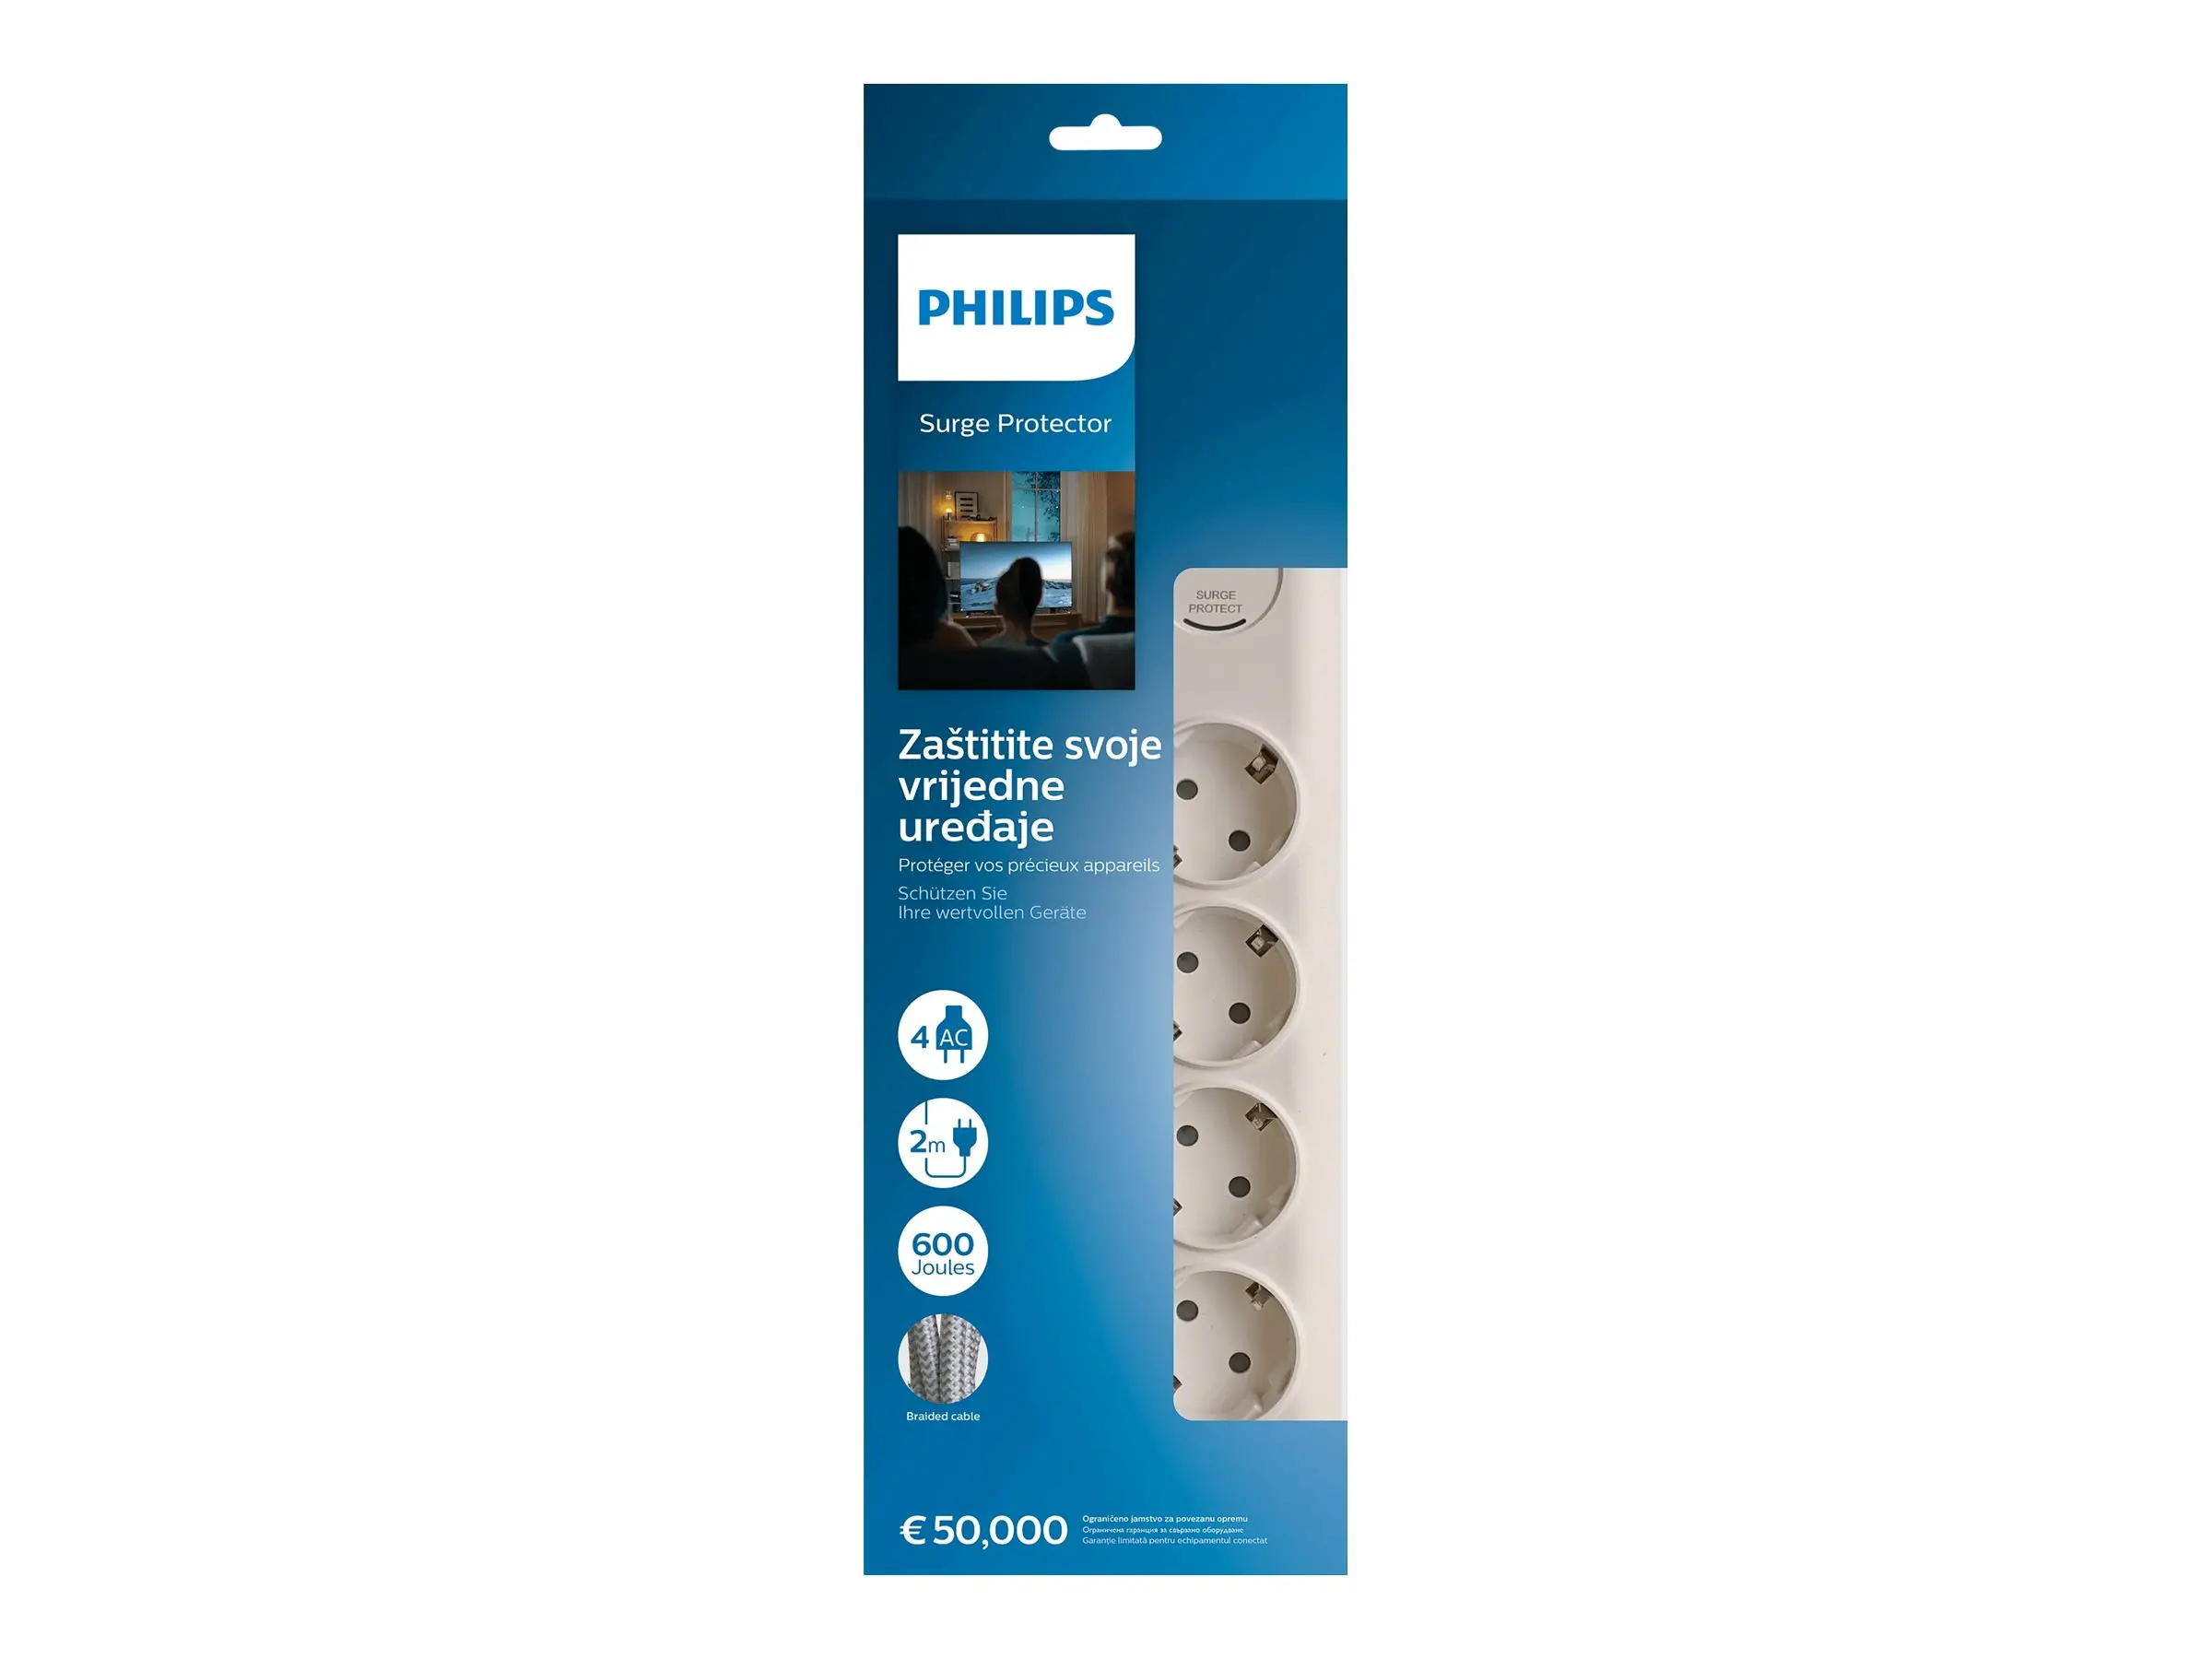 PHILIPS Surge protector 4 outlets 600J of surge protection 3680W 16A Automatic safety shutter - image 1